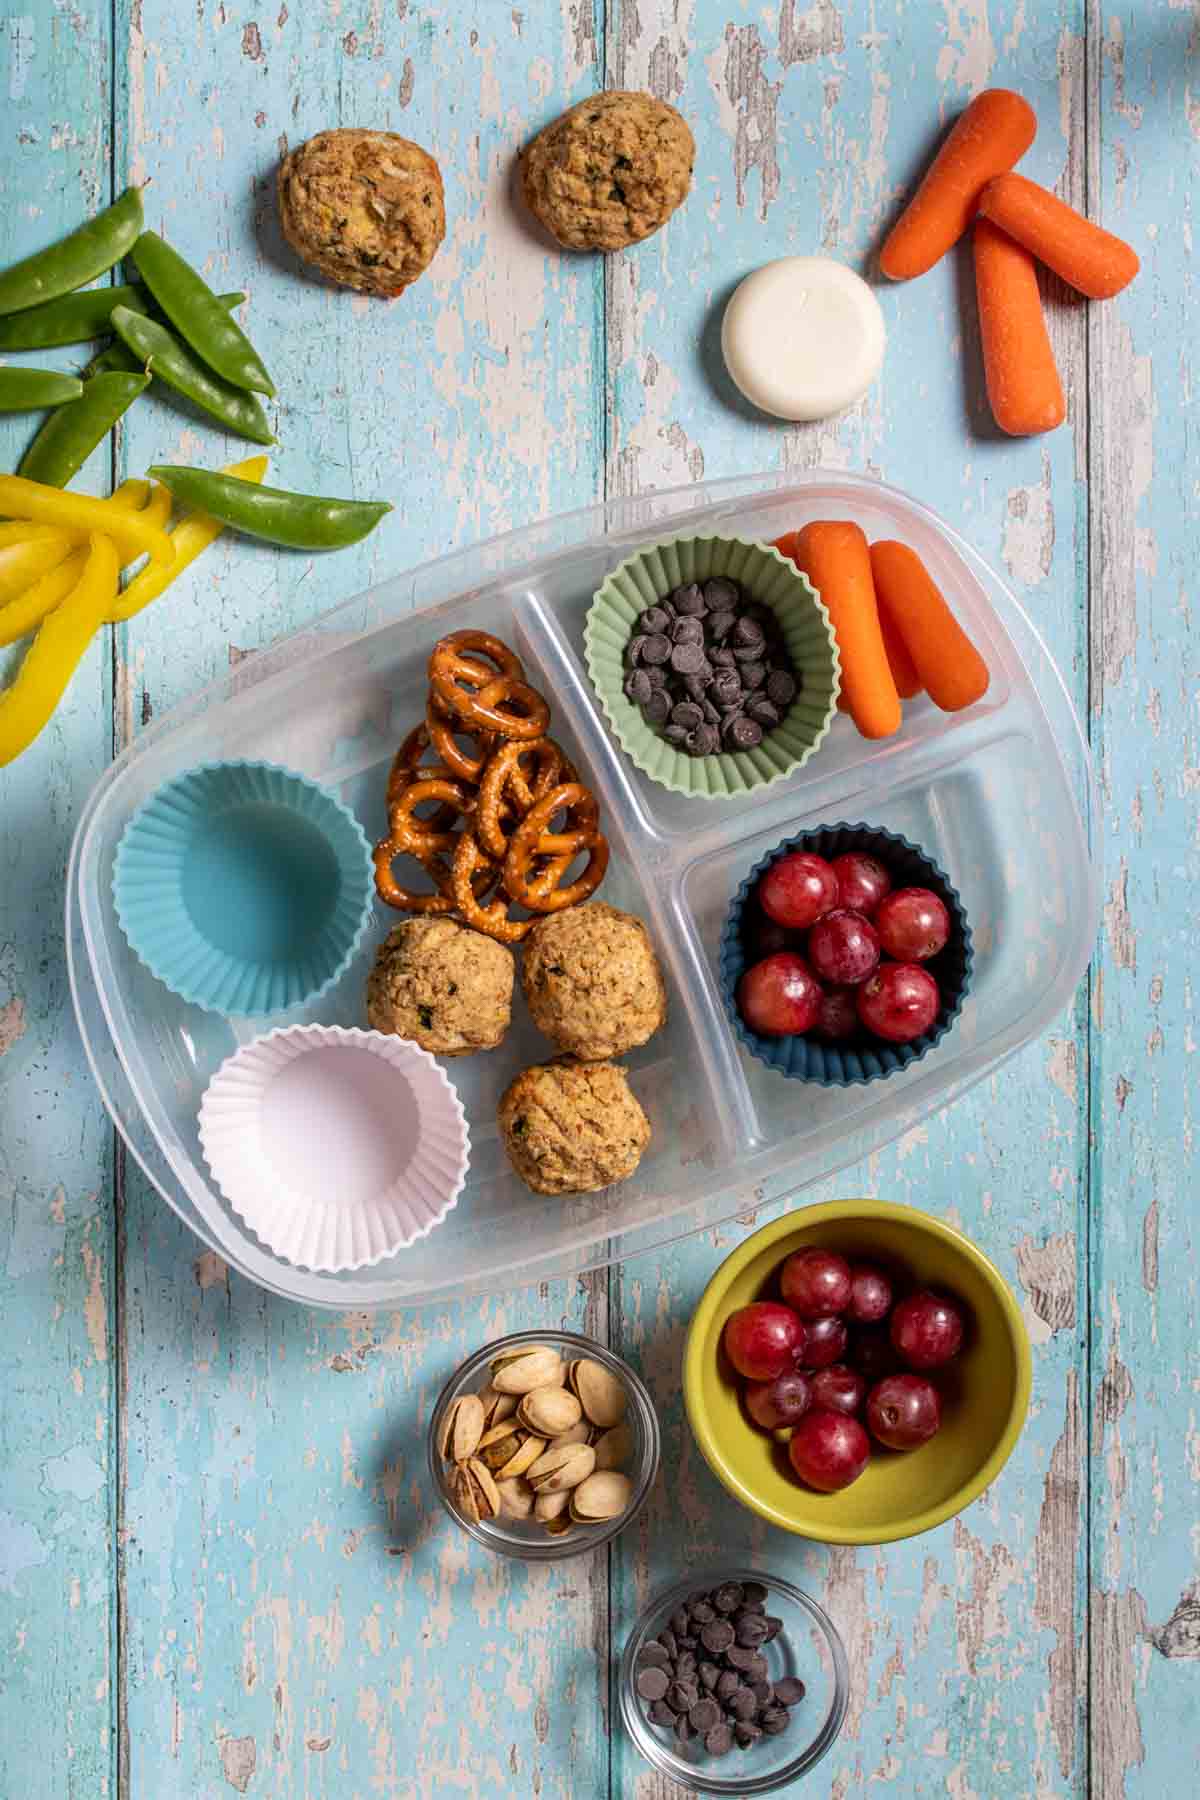 A plastic container with sections and cupcake liners to put in fruit, veggies and snacks with some filled already.